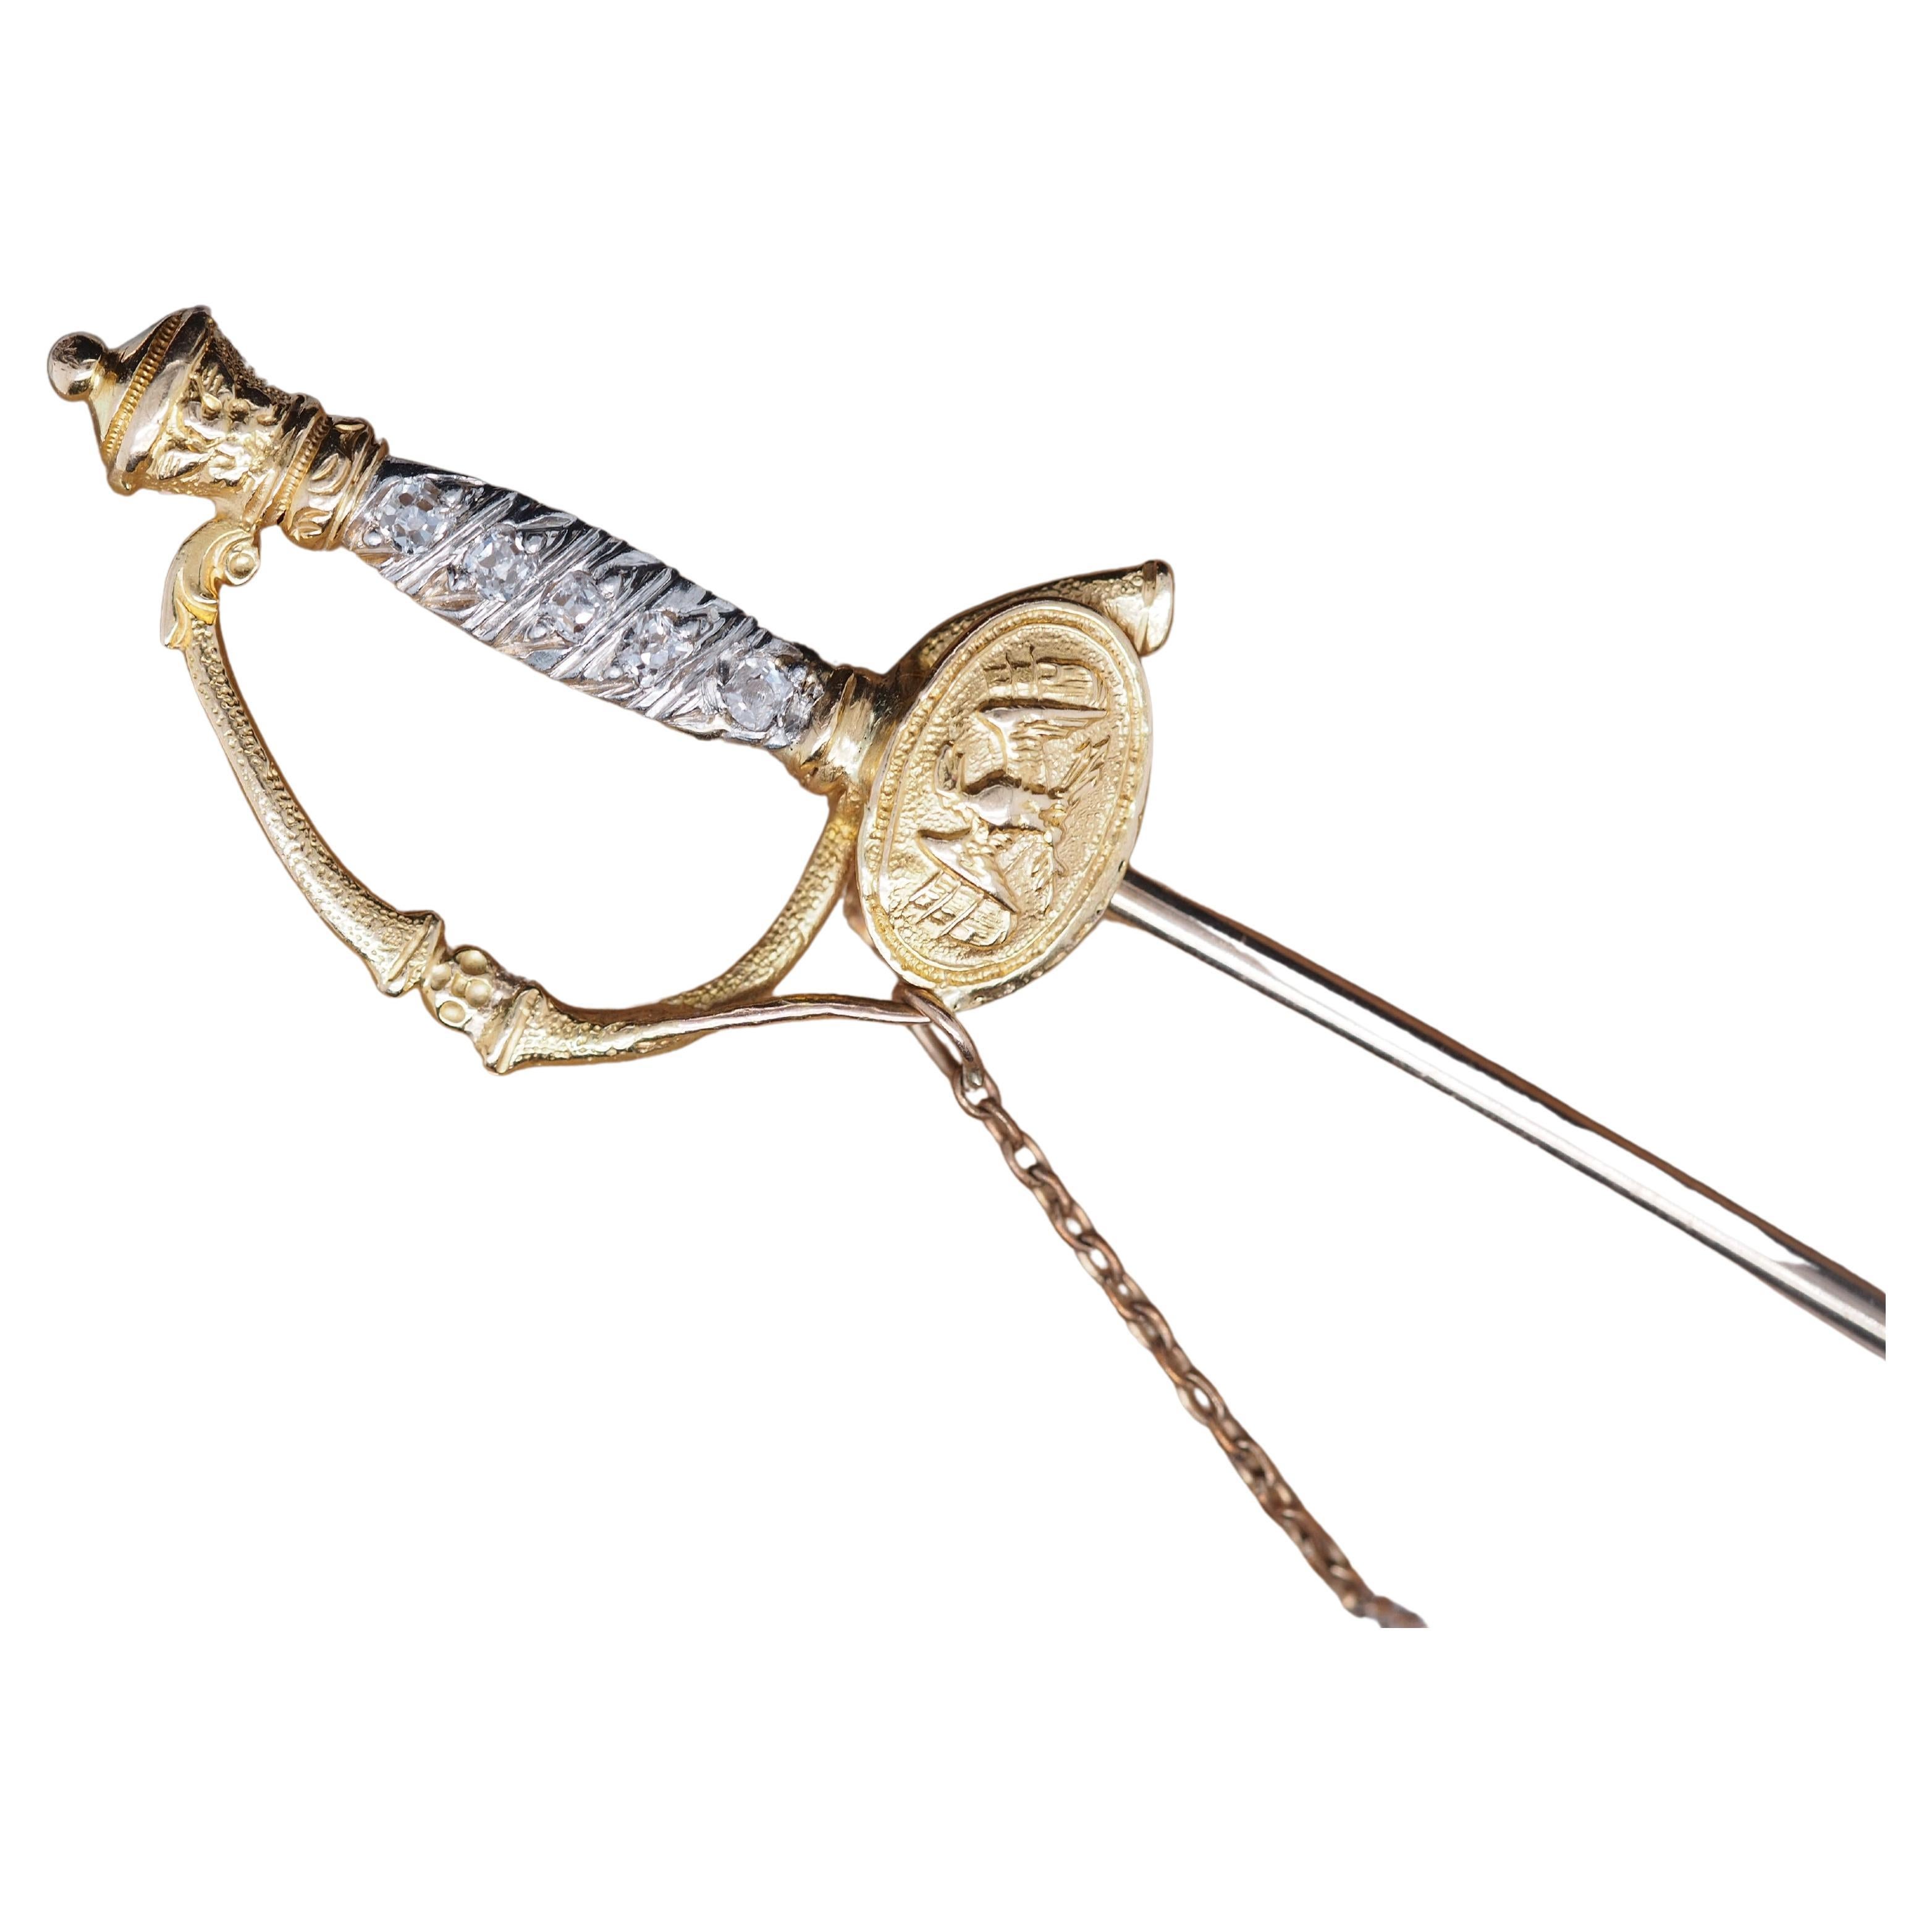 14k Sword Pin with Diamonds and Intricate Detail